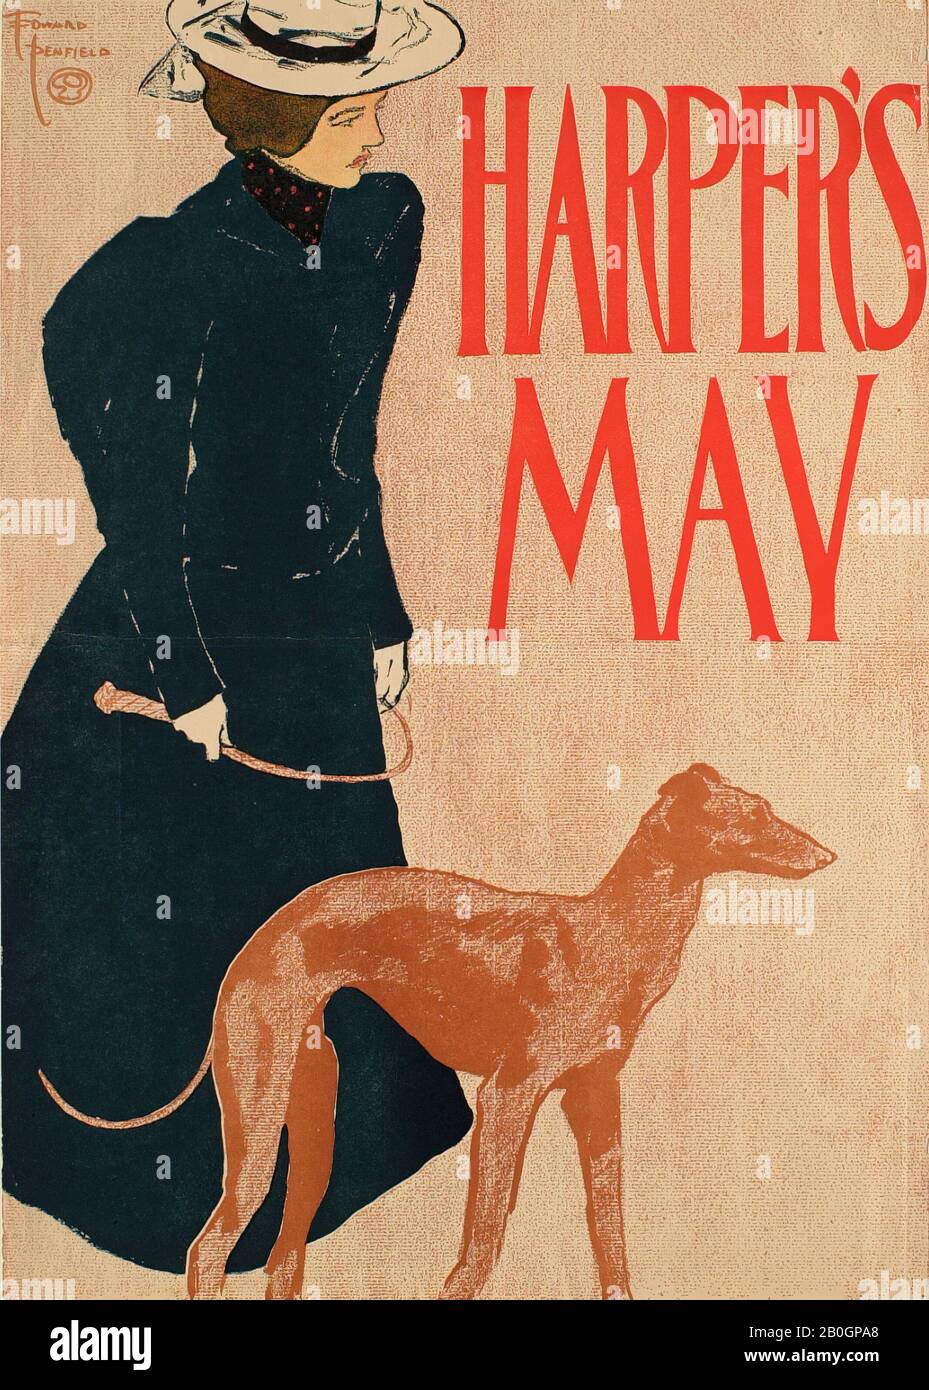 Edward Penfield, American, 1866–1925, Woman in Dark Blue Suit Walking Dog, May Harper's, 1885–1915, Zincograph on paper, sheet: 18 1/2 x 13 1/8 in. (47 x 33.4 cm Stock Photo